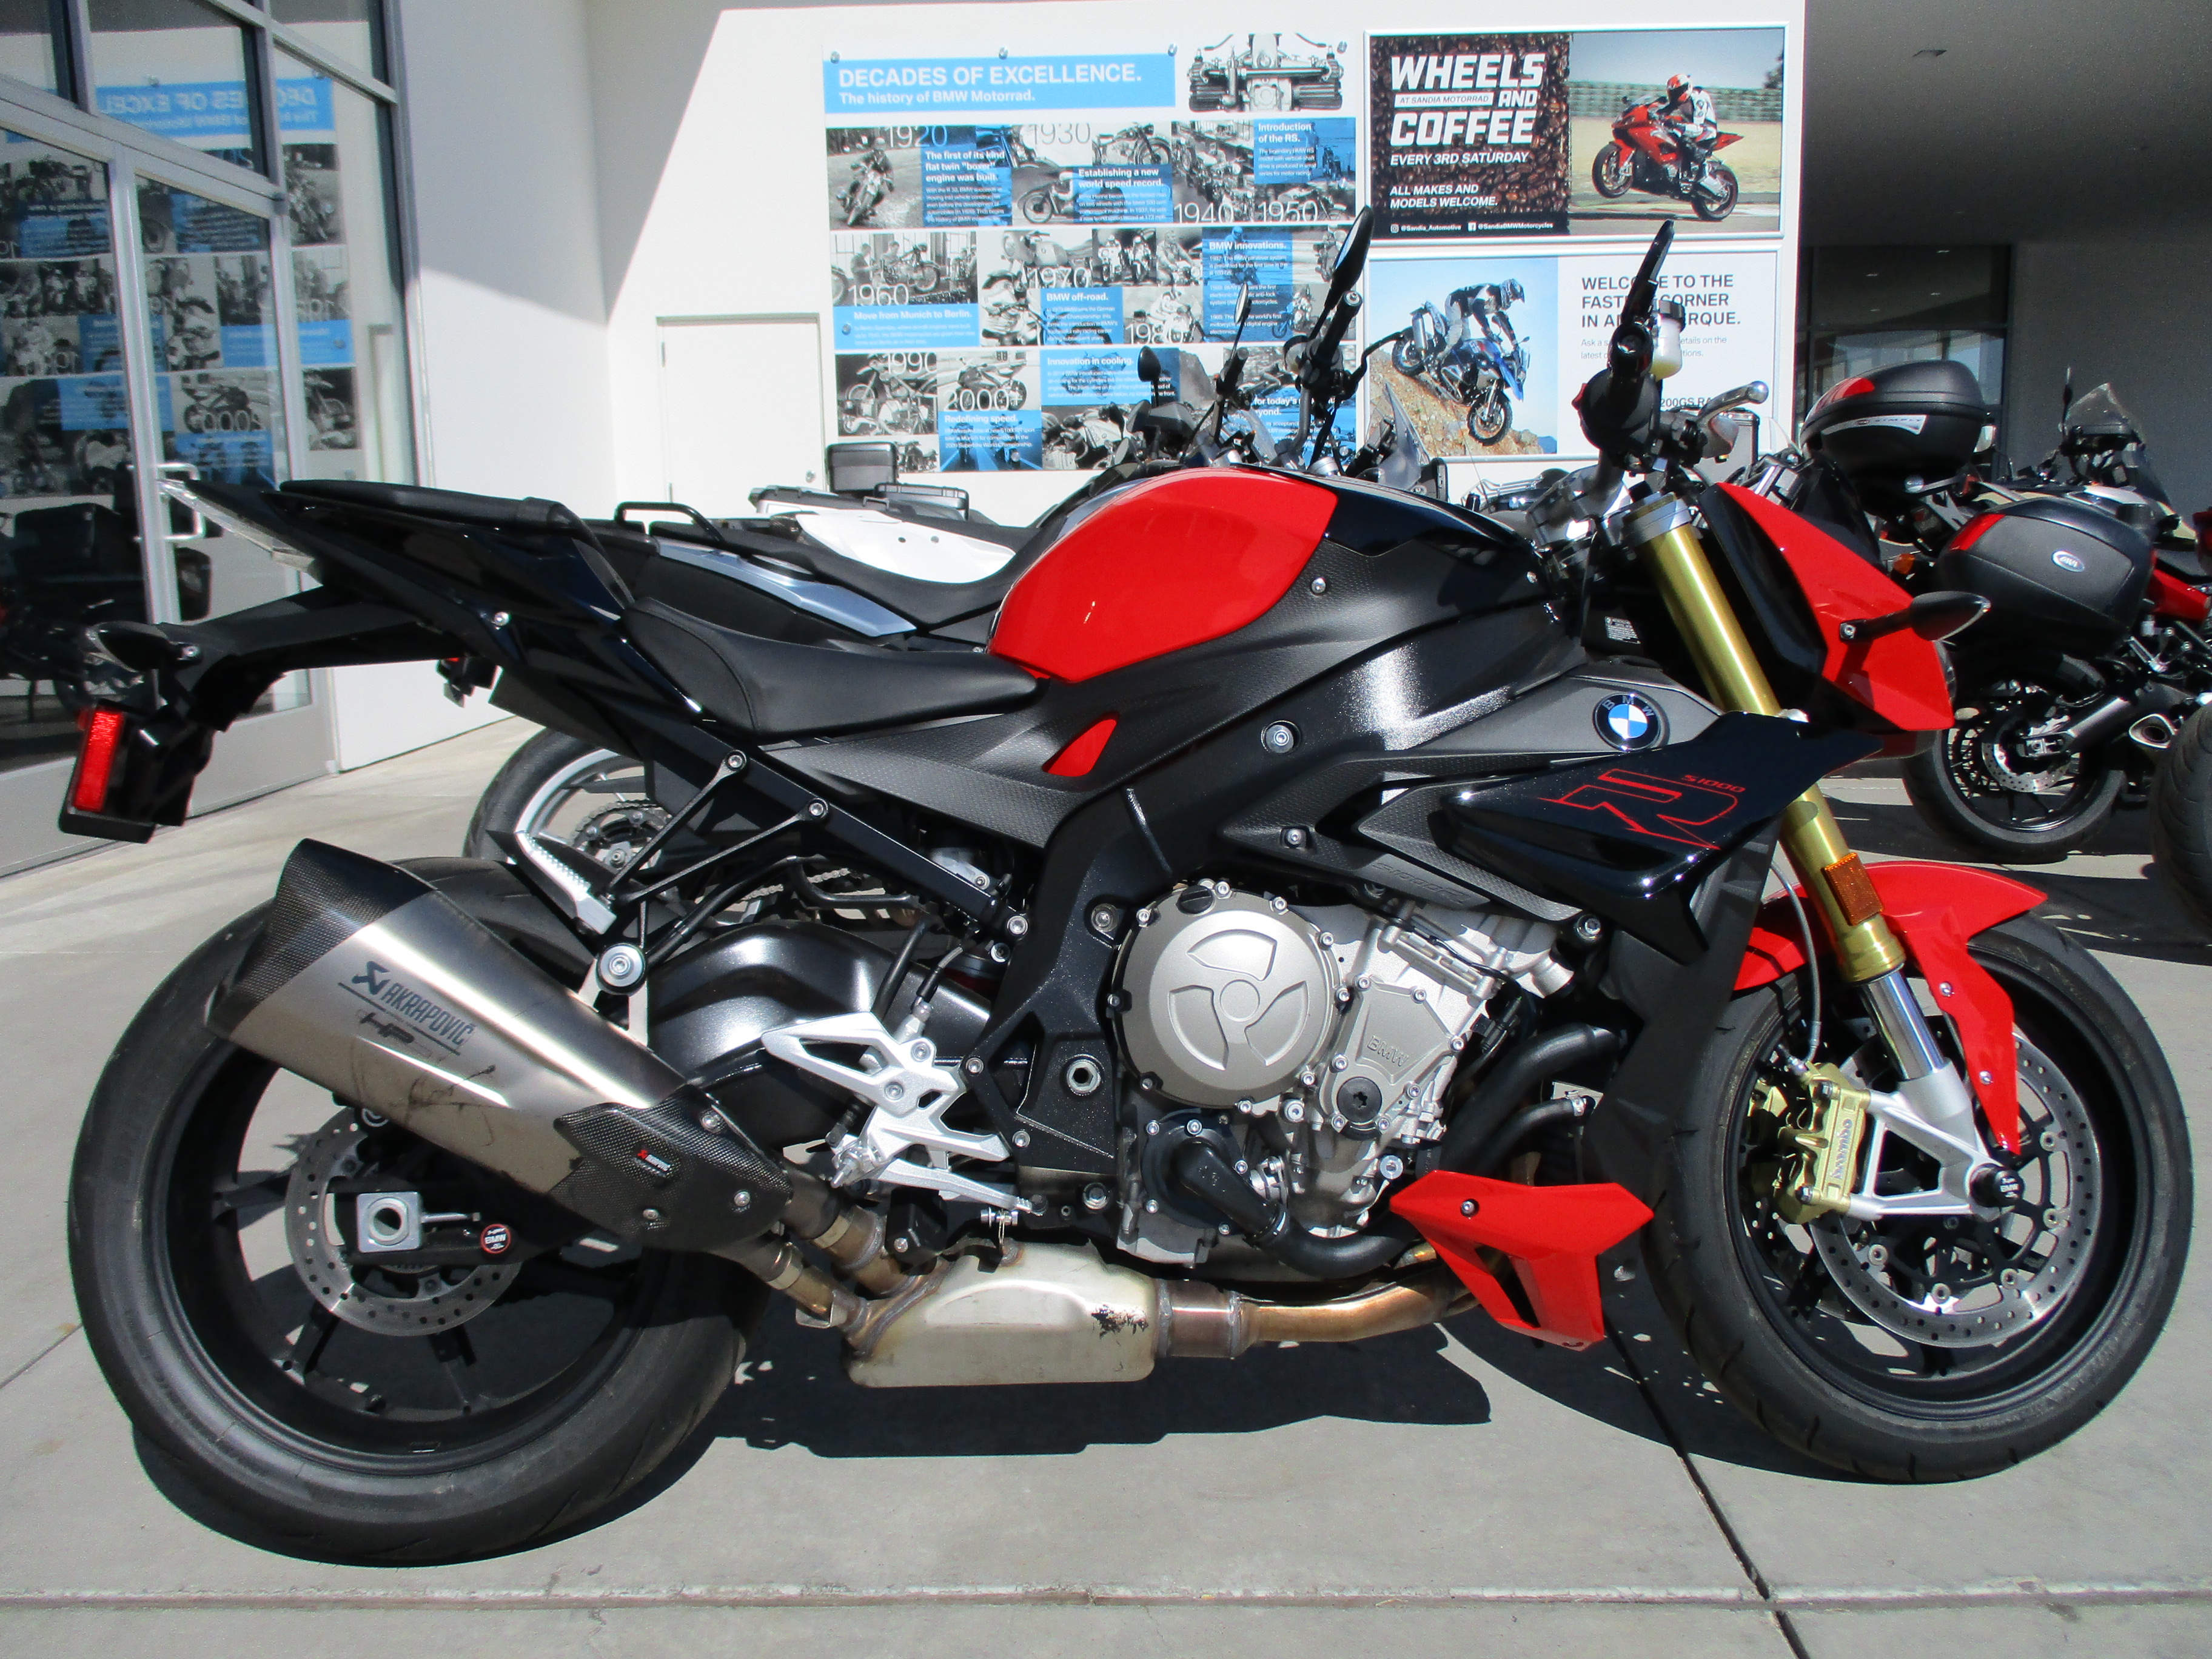 Pre-Owned Motorcycle Inventory - S1000R - Sandia BMW Motorcycles